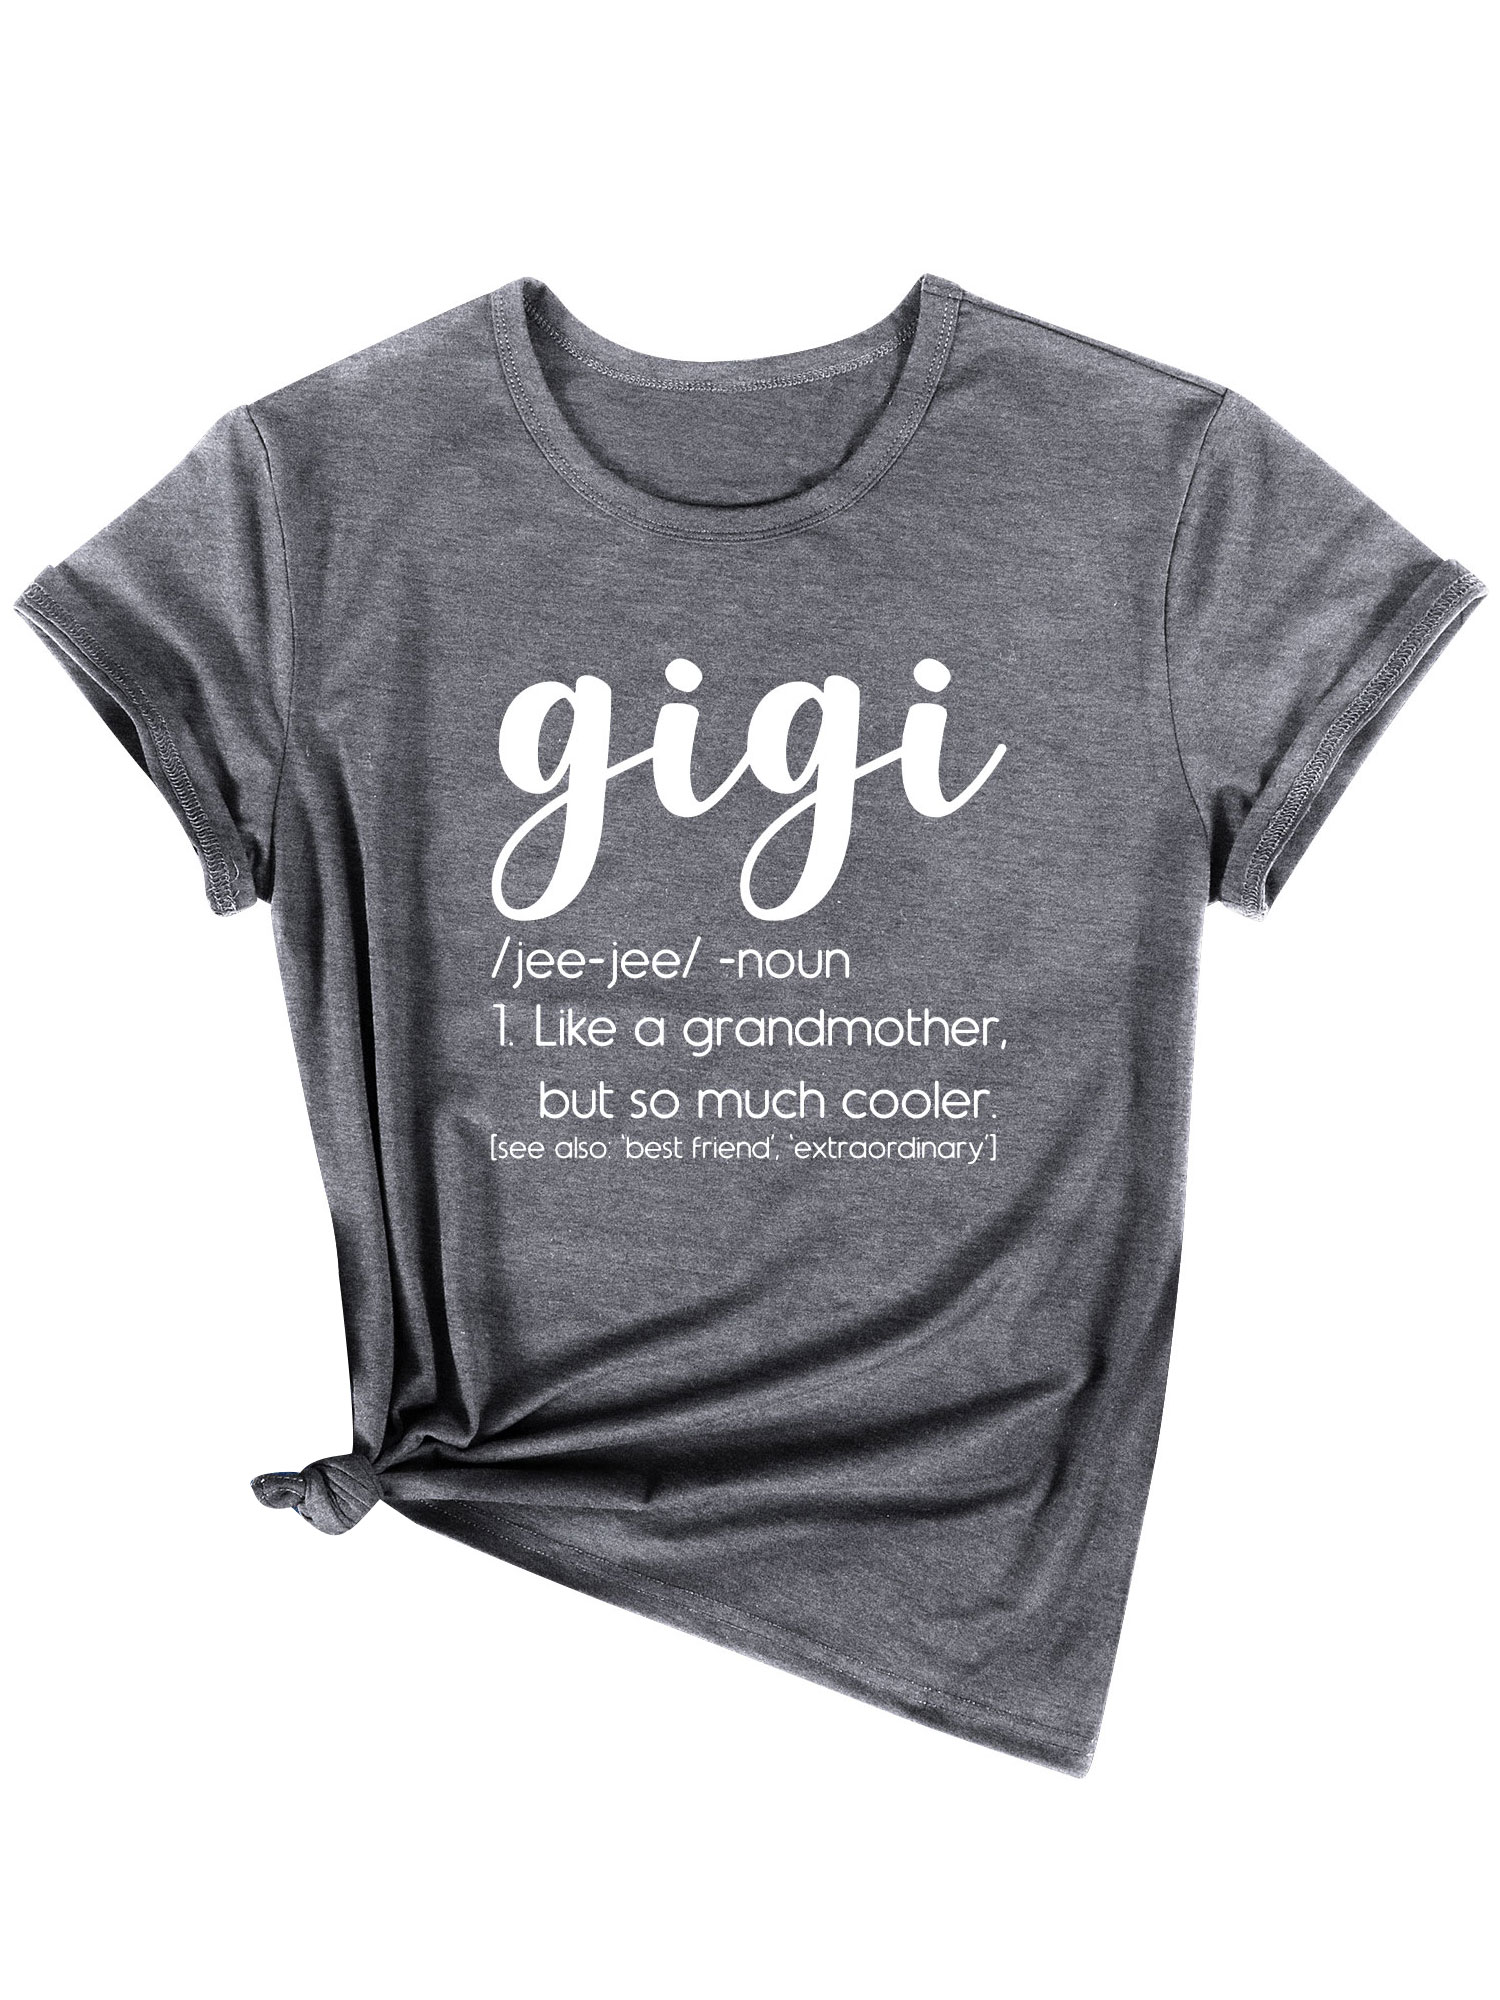 TWZH Women Gigi Jee Jee Noun Like A Grandmother But So Much Cooler T-shirts - image 1 of 6